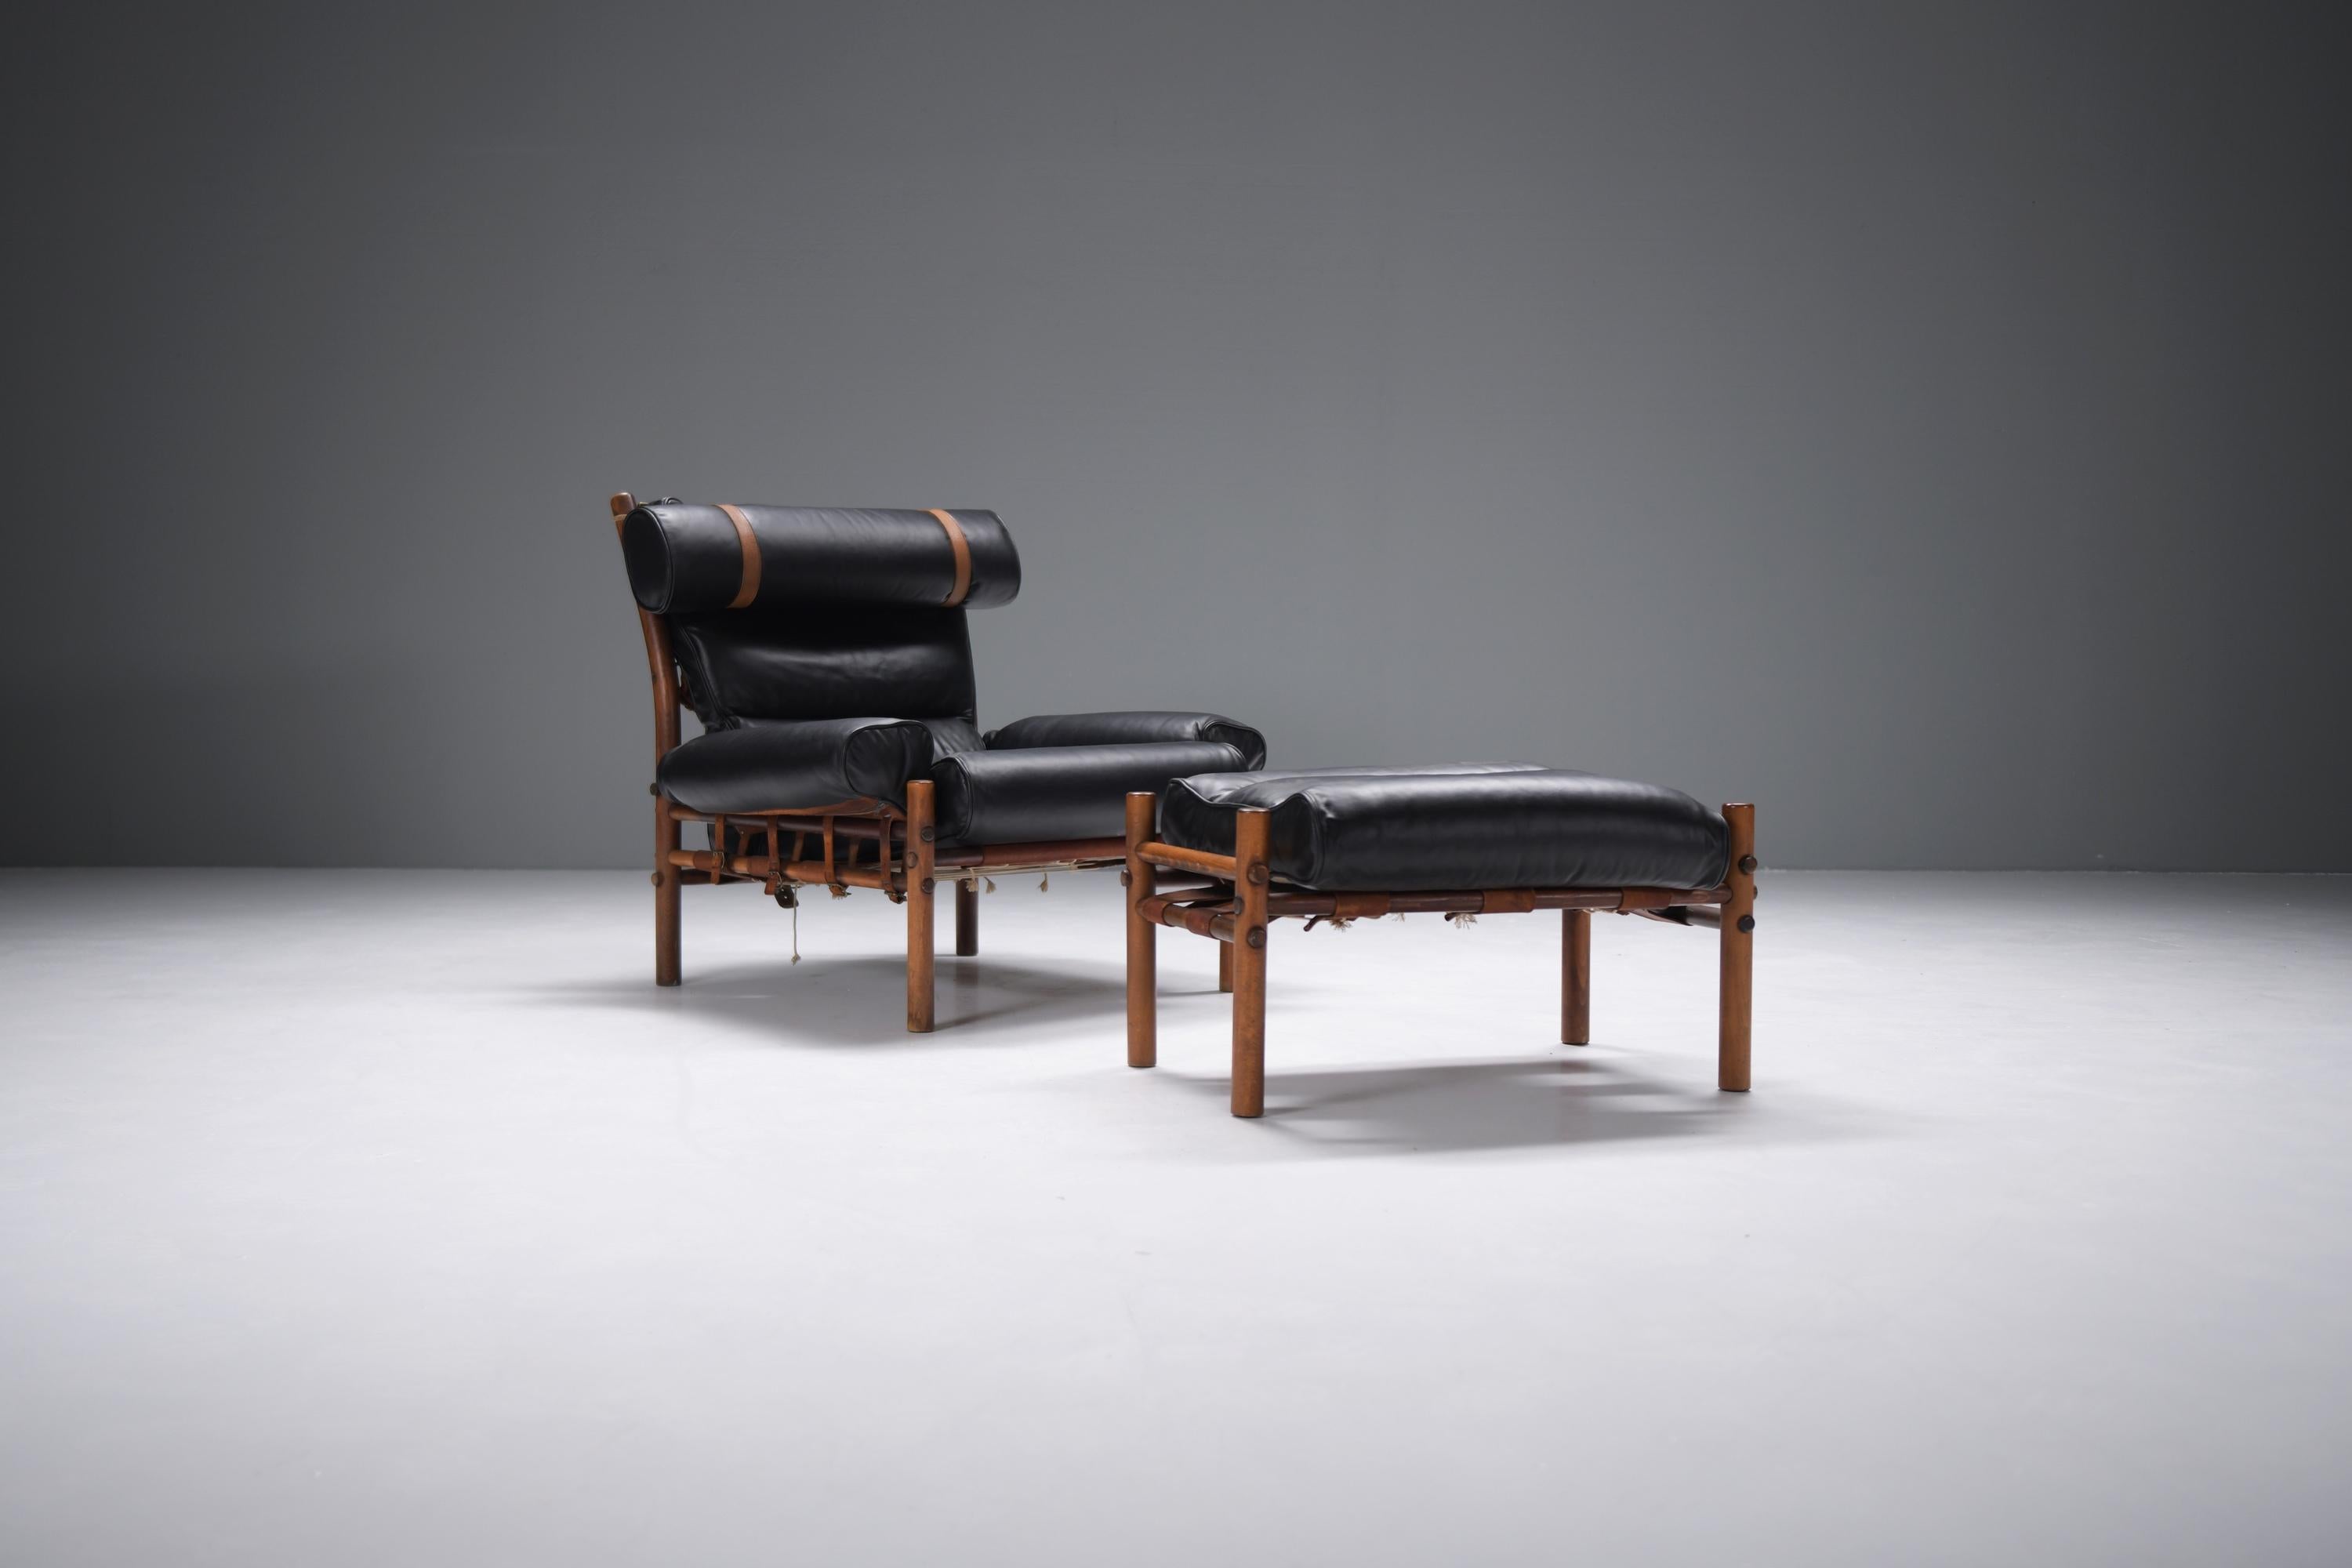 Stunning Vintage Inca lounge chair with ottoman in new black analine leather. Signed.
Designed by  Arne Norell for Norell Möbel AB Aneby, Sweden 1960s

After the “Safari Chair”, Arne Norell turned his attention to crafting a chair with the same